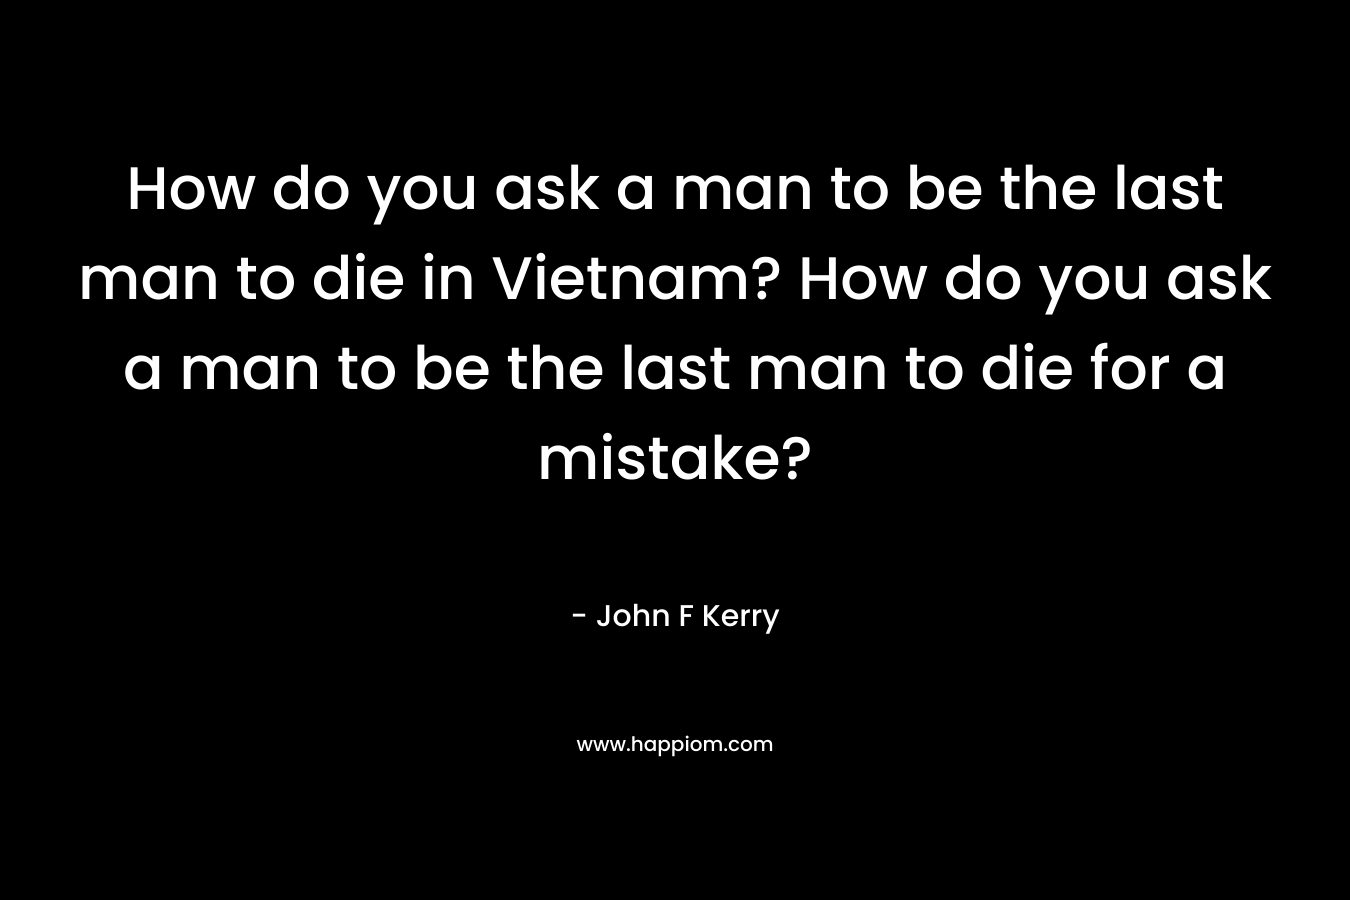 How do you ask a man to be the last man to die in Vietnam? How do you ask a man to be the last man to die for a mistake?